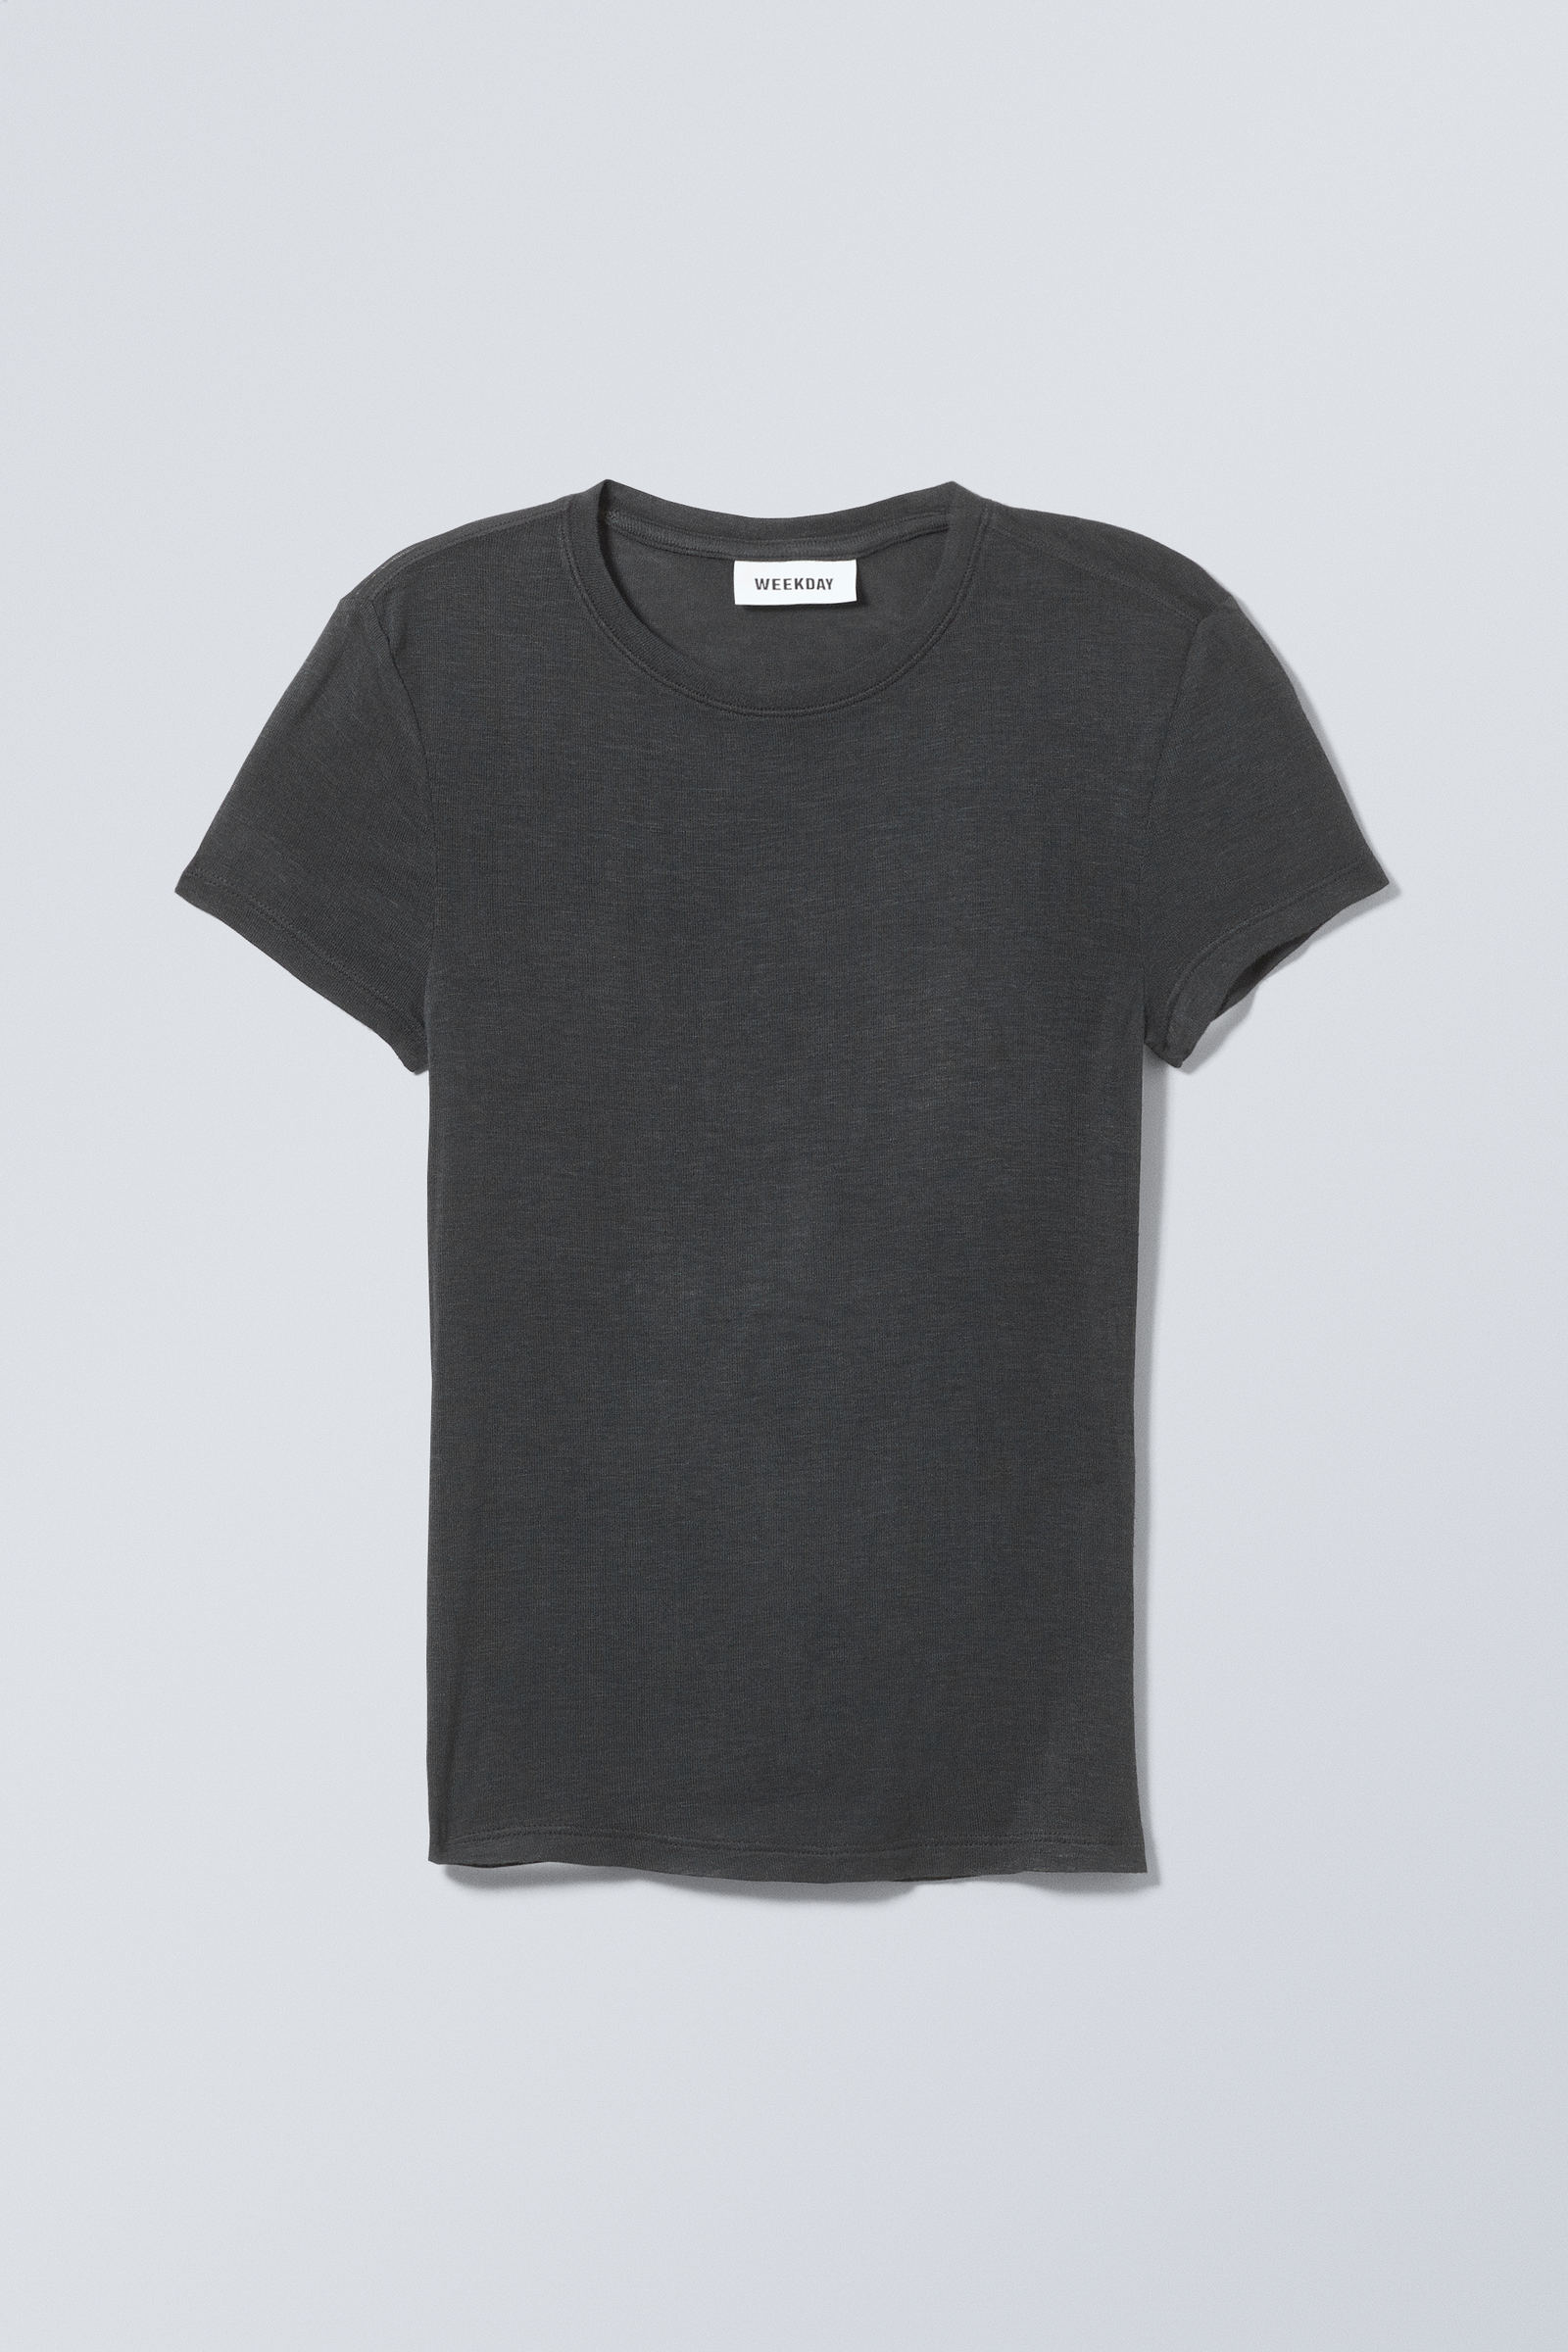 Off Black - Soft Sheer Fitted Tshirt - 3